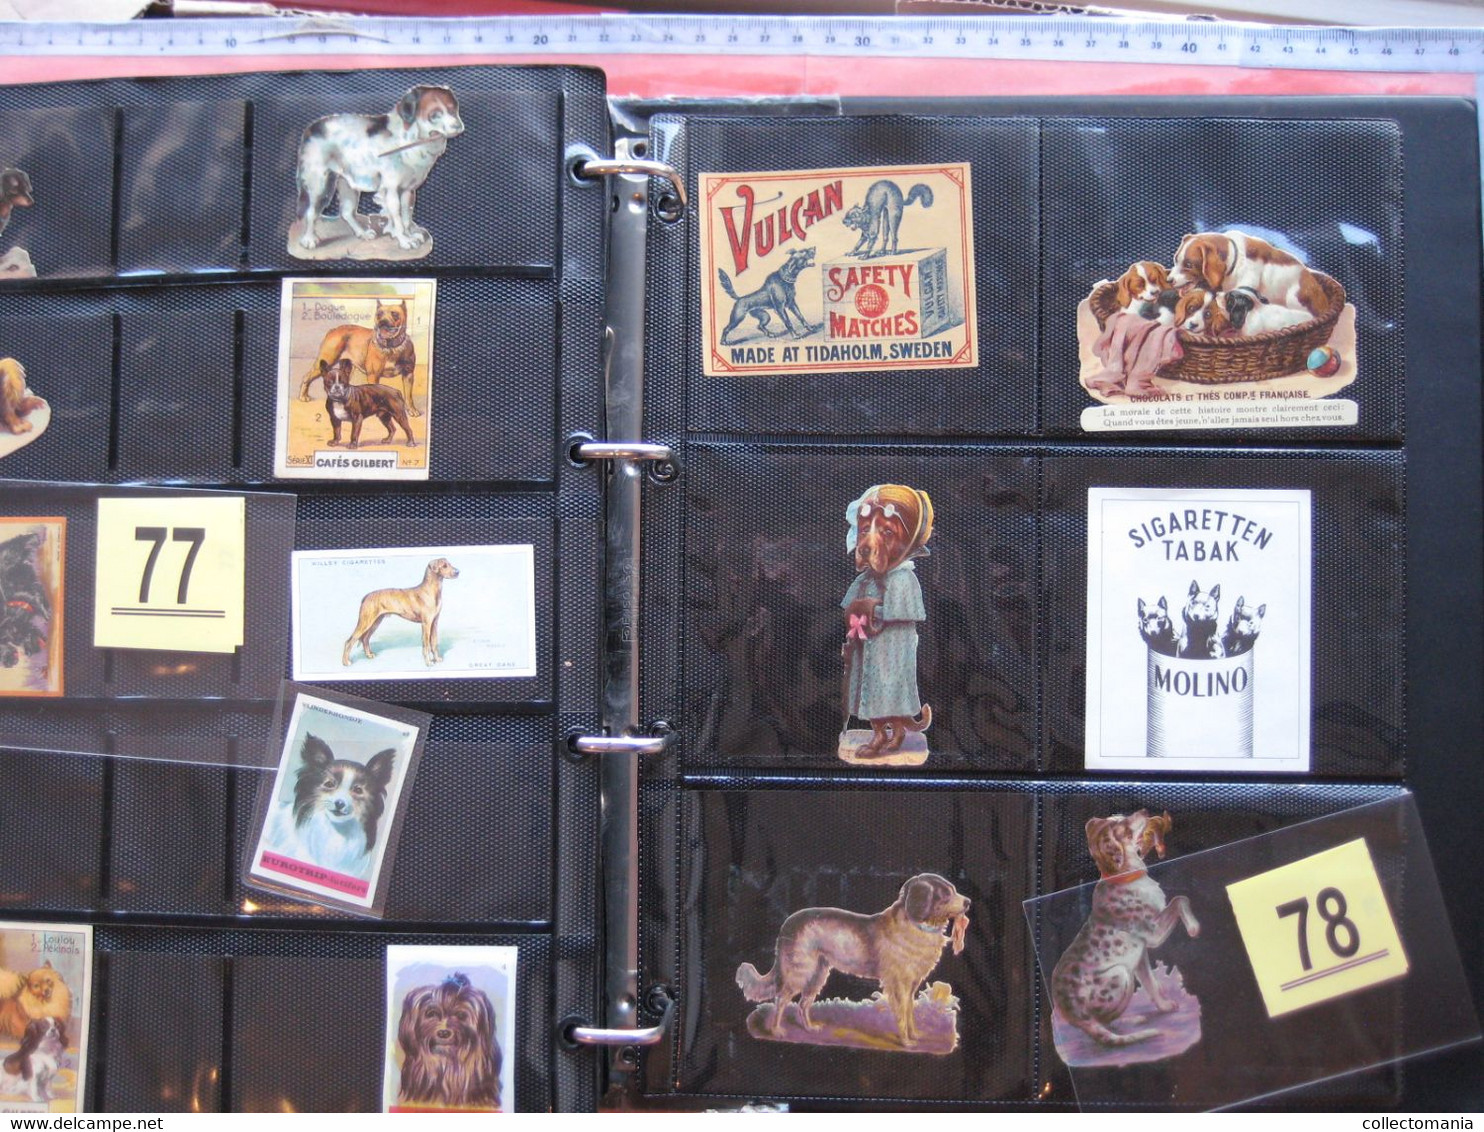 SCRAPS_MAP25 COLLECTION anno 1880 à 1900 Litho prints (count yourself ) die-cuts anthropomorph Dogs Hunden Chien